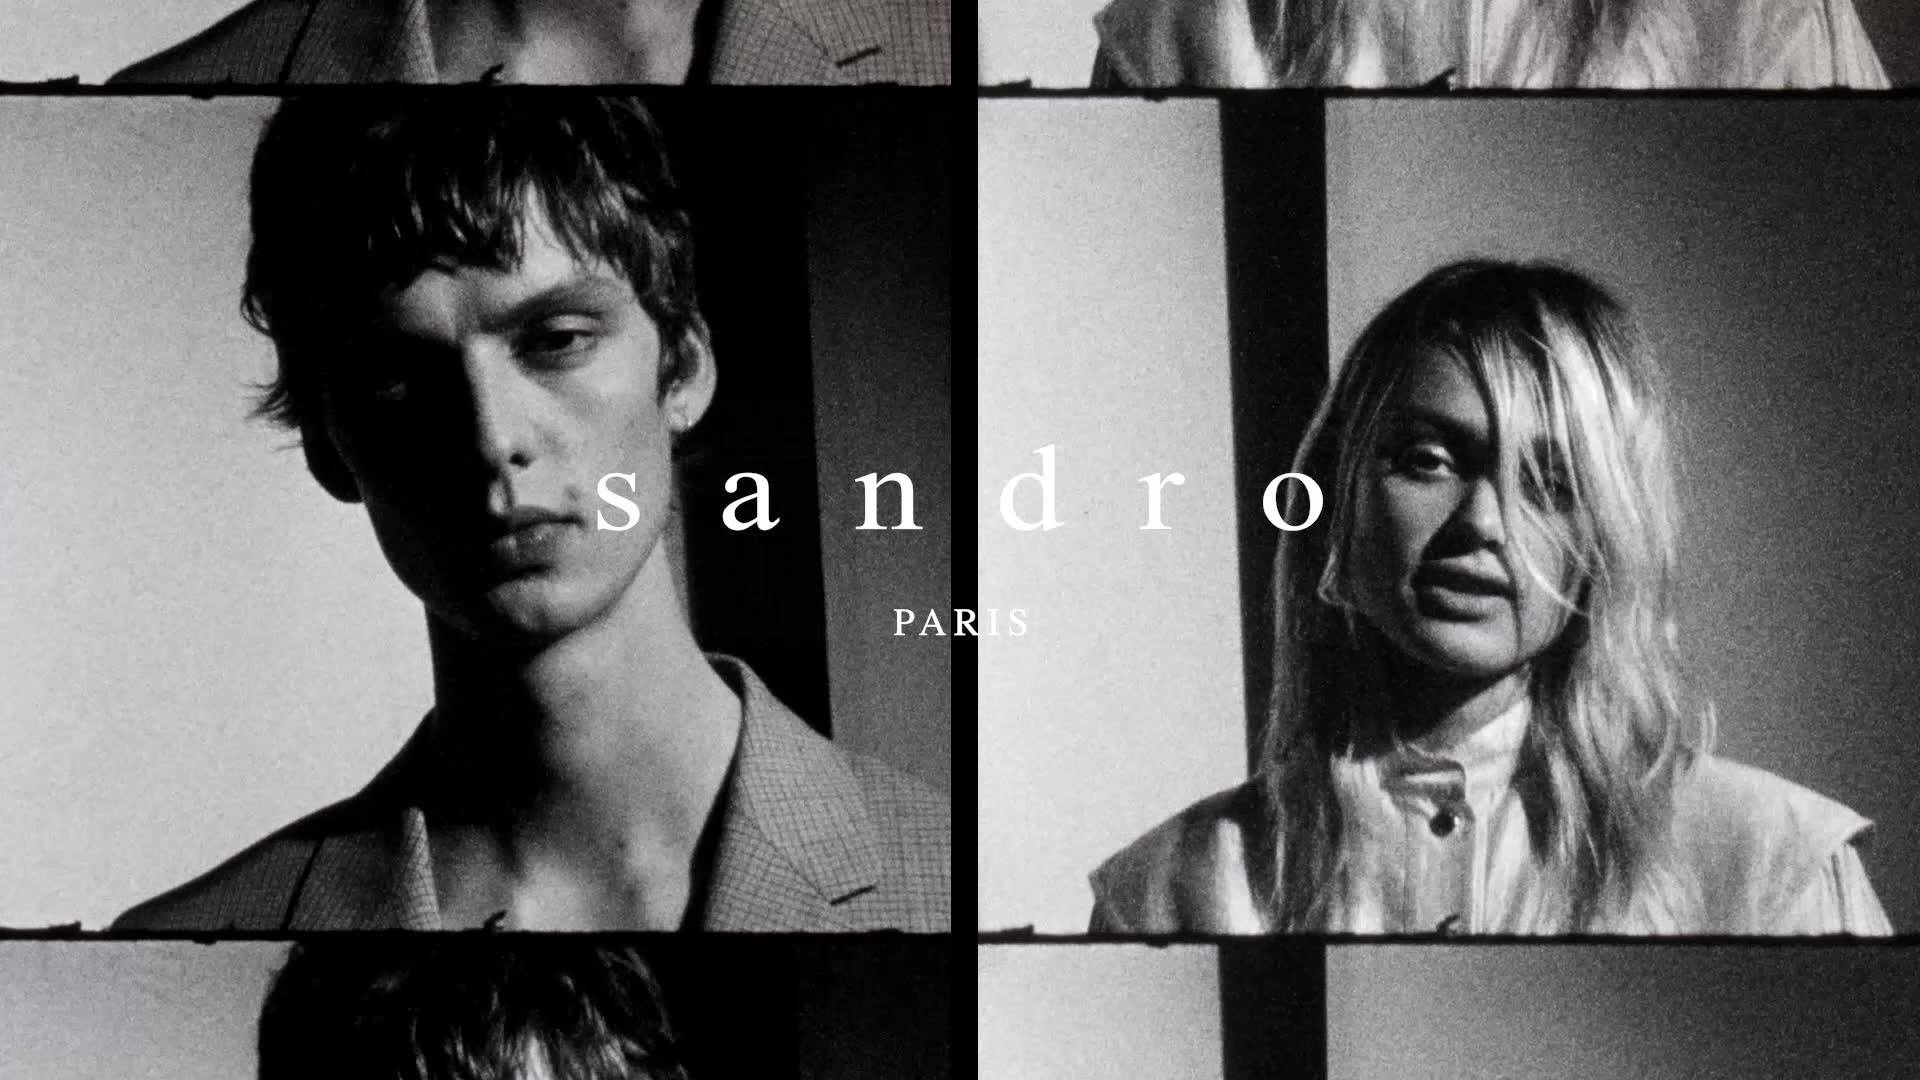 This season is ours. SS20 for now, forever. Sandro.